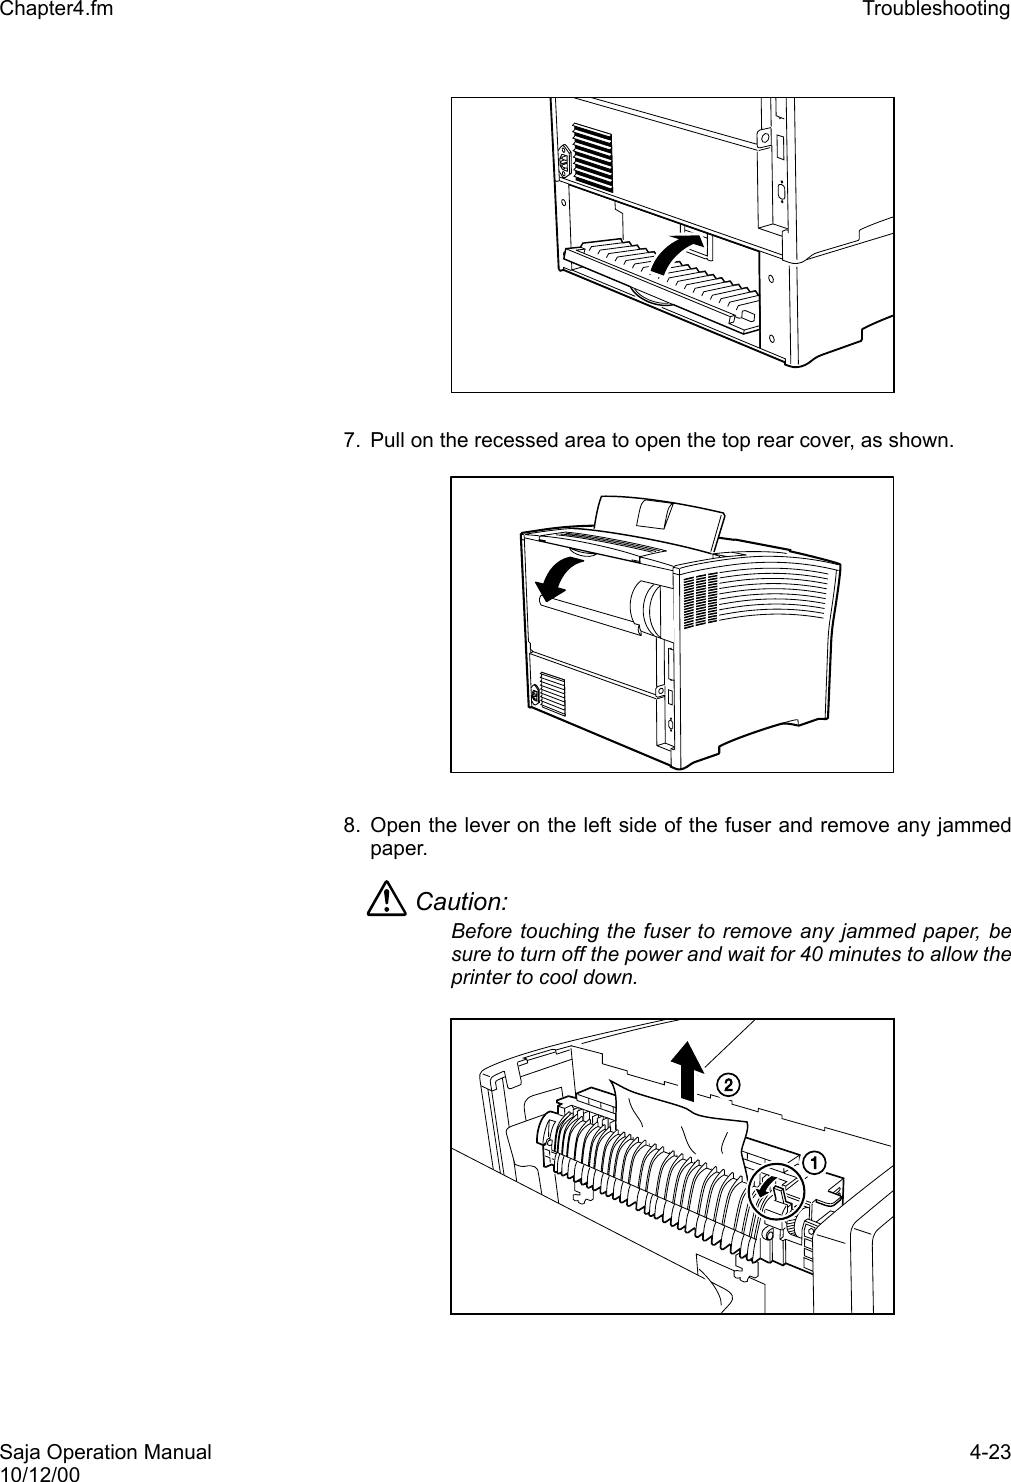 Saja Operation Manual 4-2310/12/00Chapter4.fm Troubleshooting 7. Pull on the recessed area to open the top rear cover, as shown. 8. Open the lever on the left side of the fuser and remove any jammedpaper.Caution: Before touching the fuser to remove any jammed paper, besure to turn off the power and wait for 40 minutes to allow theprinter to cool down.